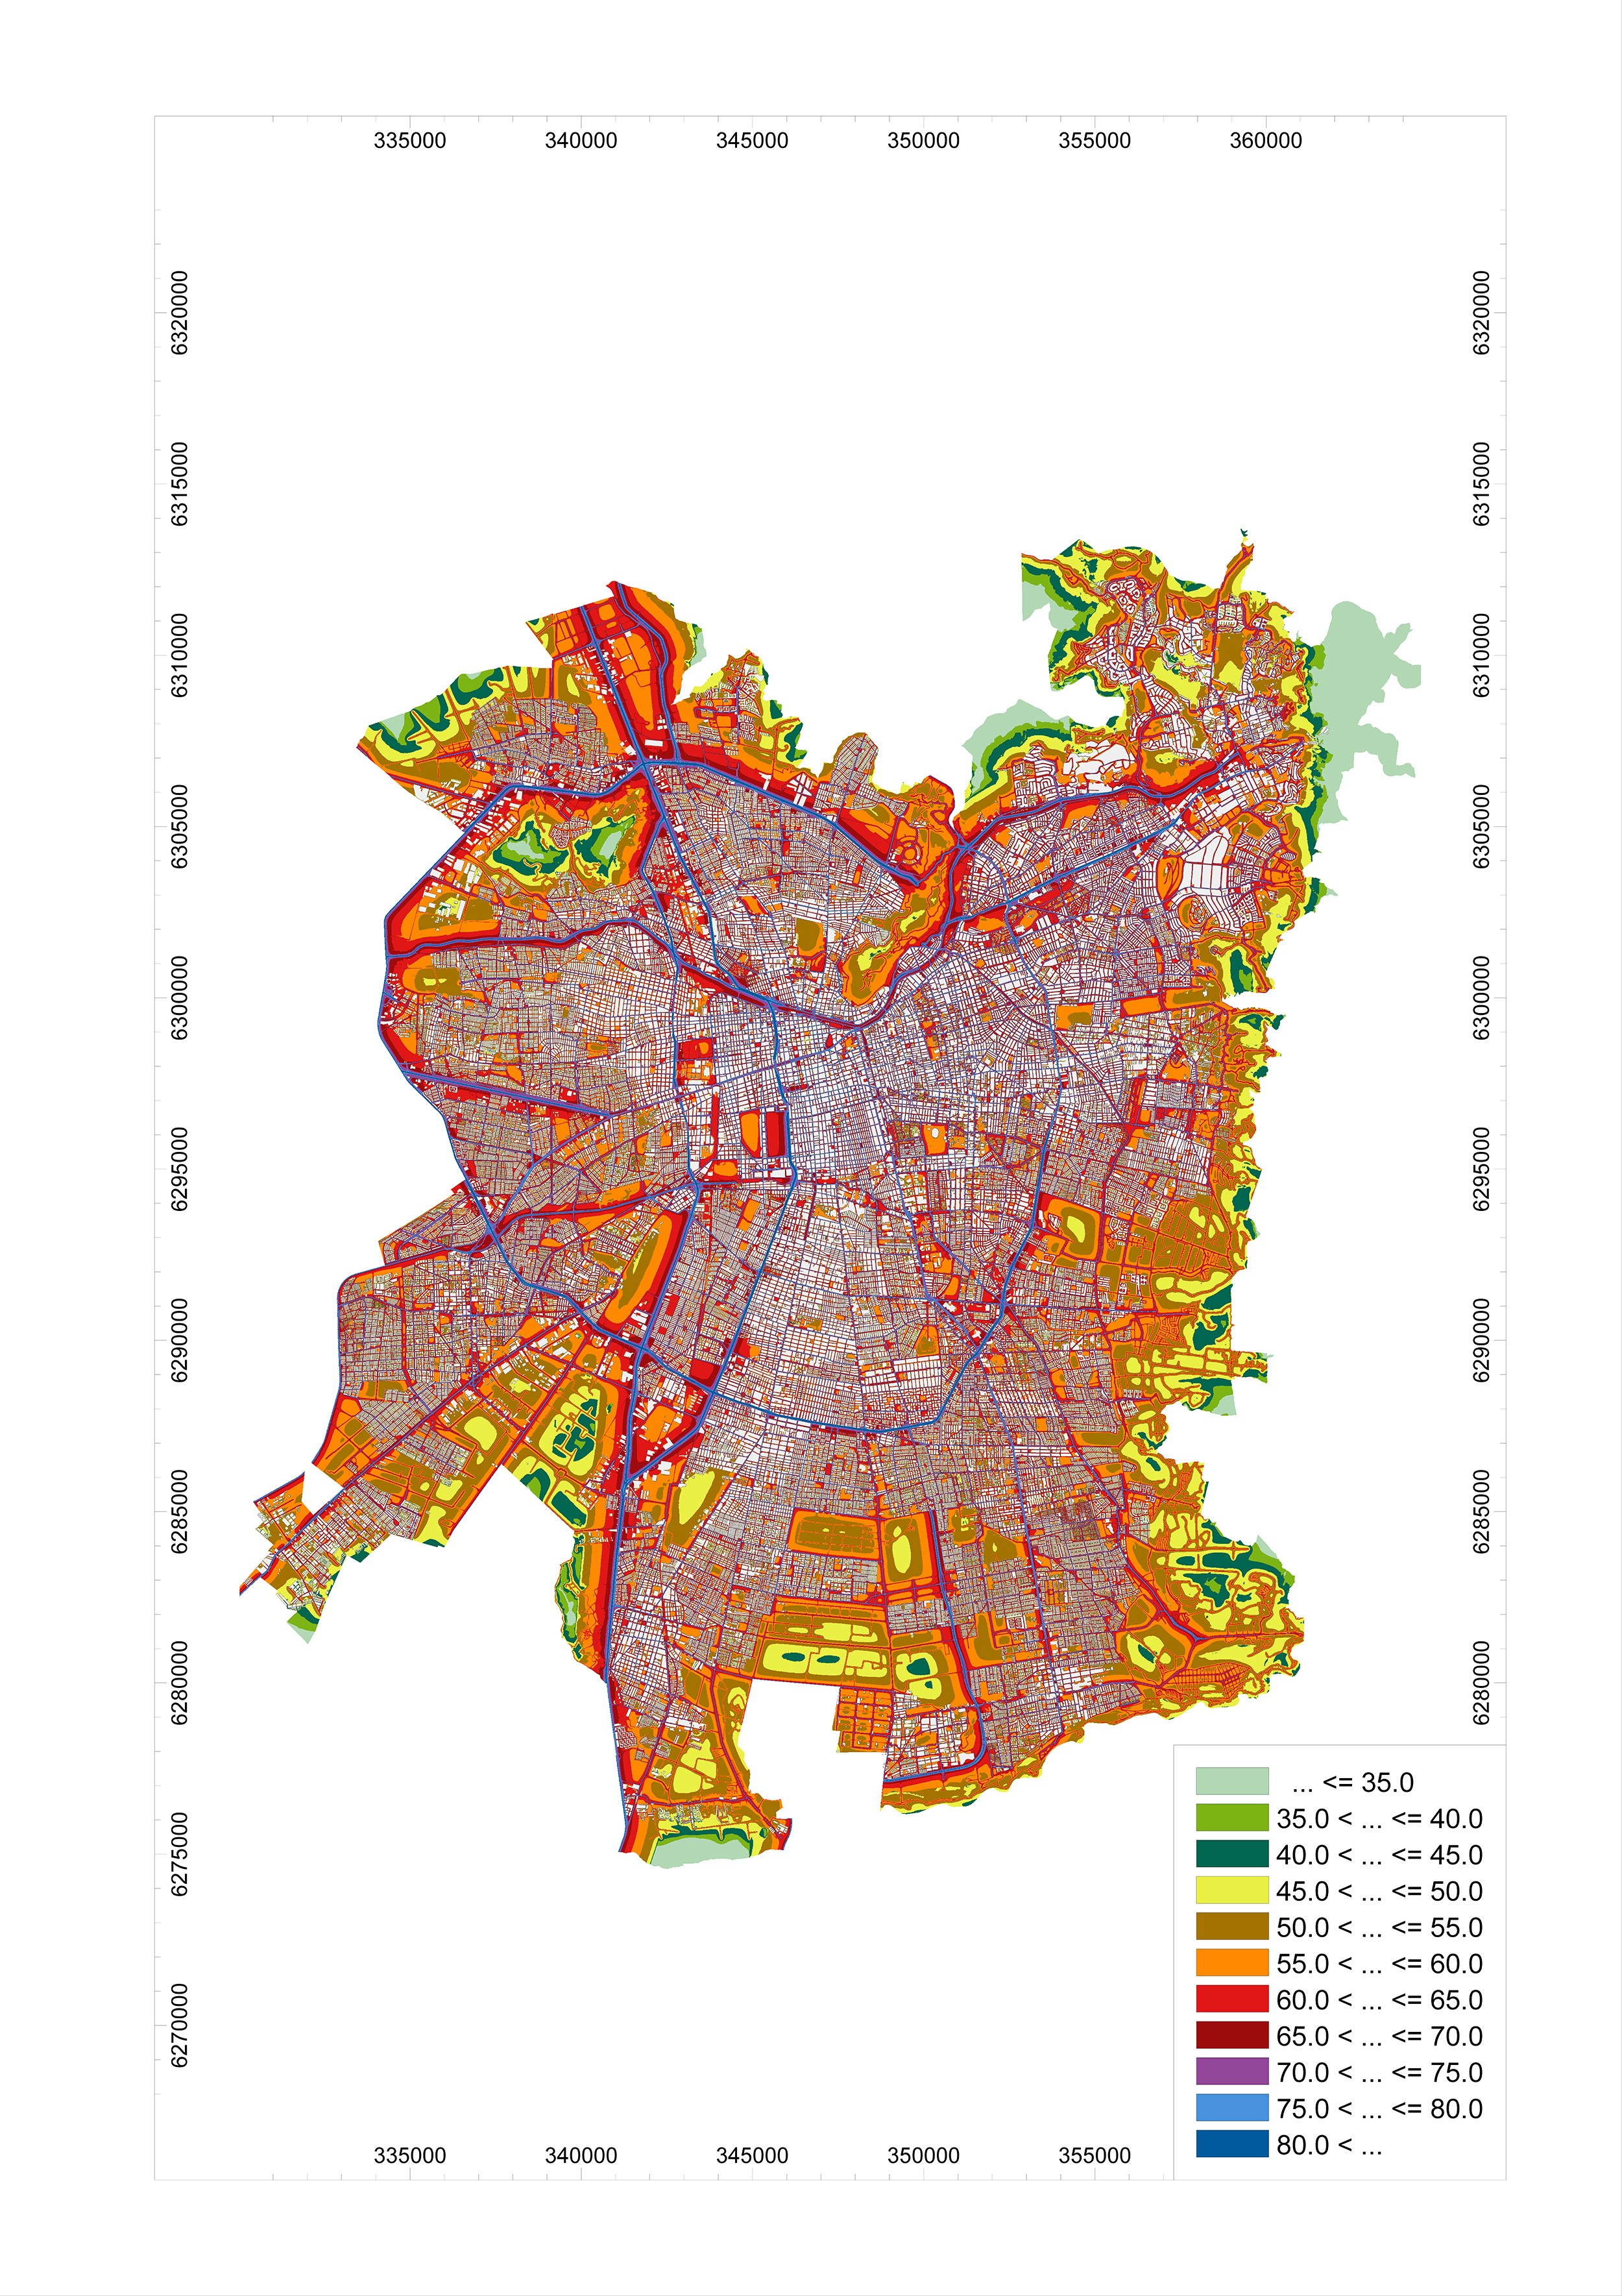 Figure 1: Daytime noise map of Chile. Source: Convergence Instruments